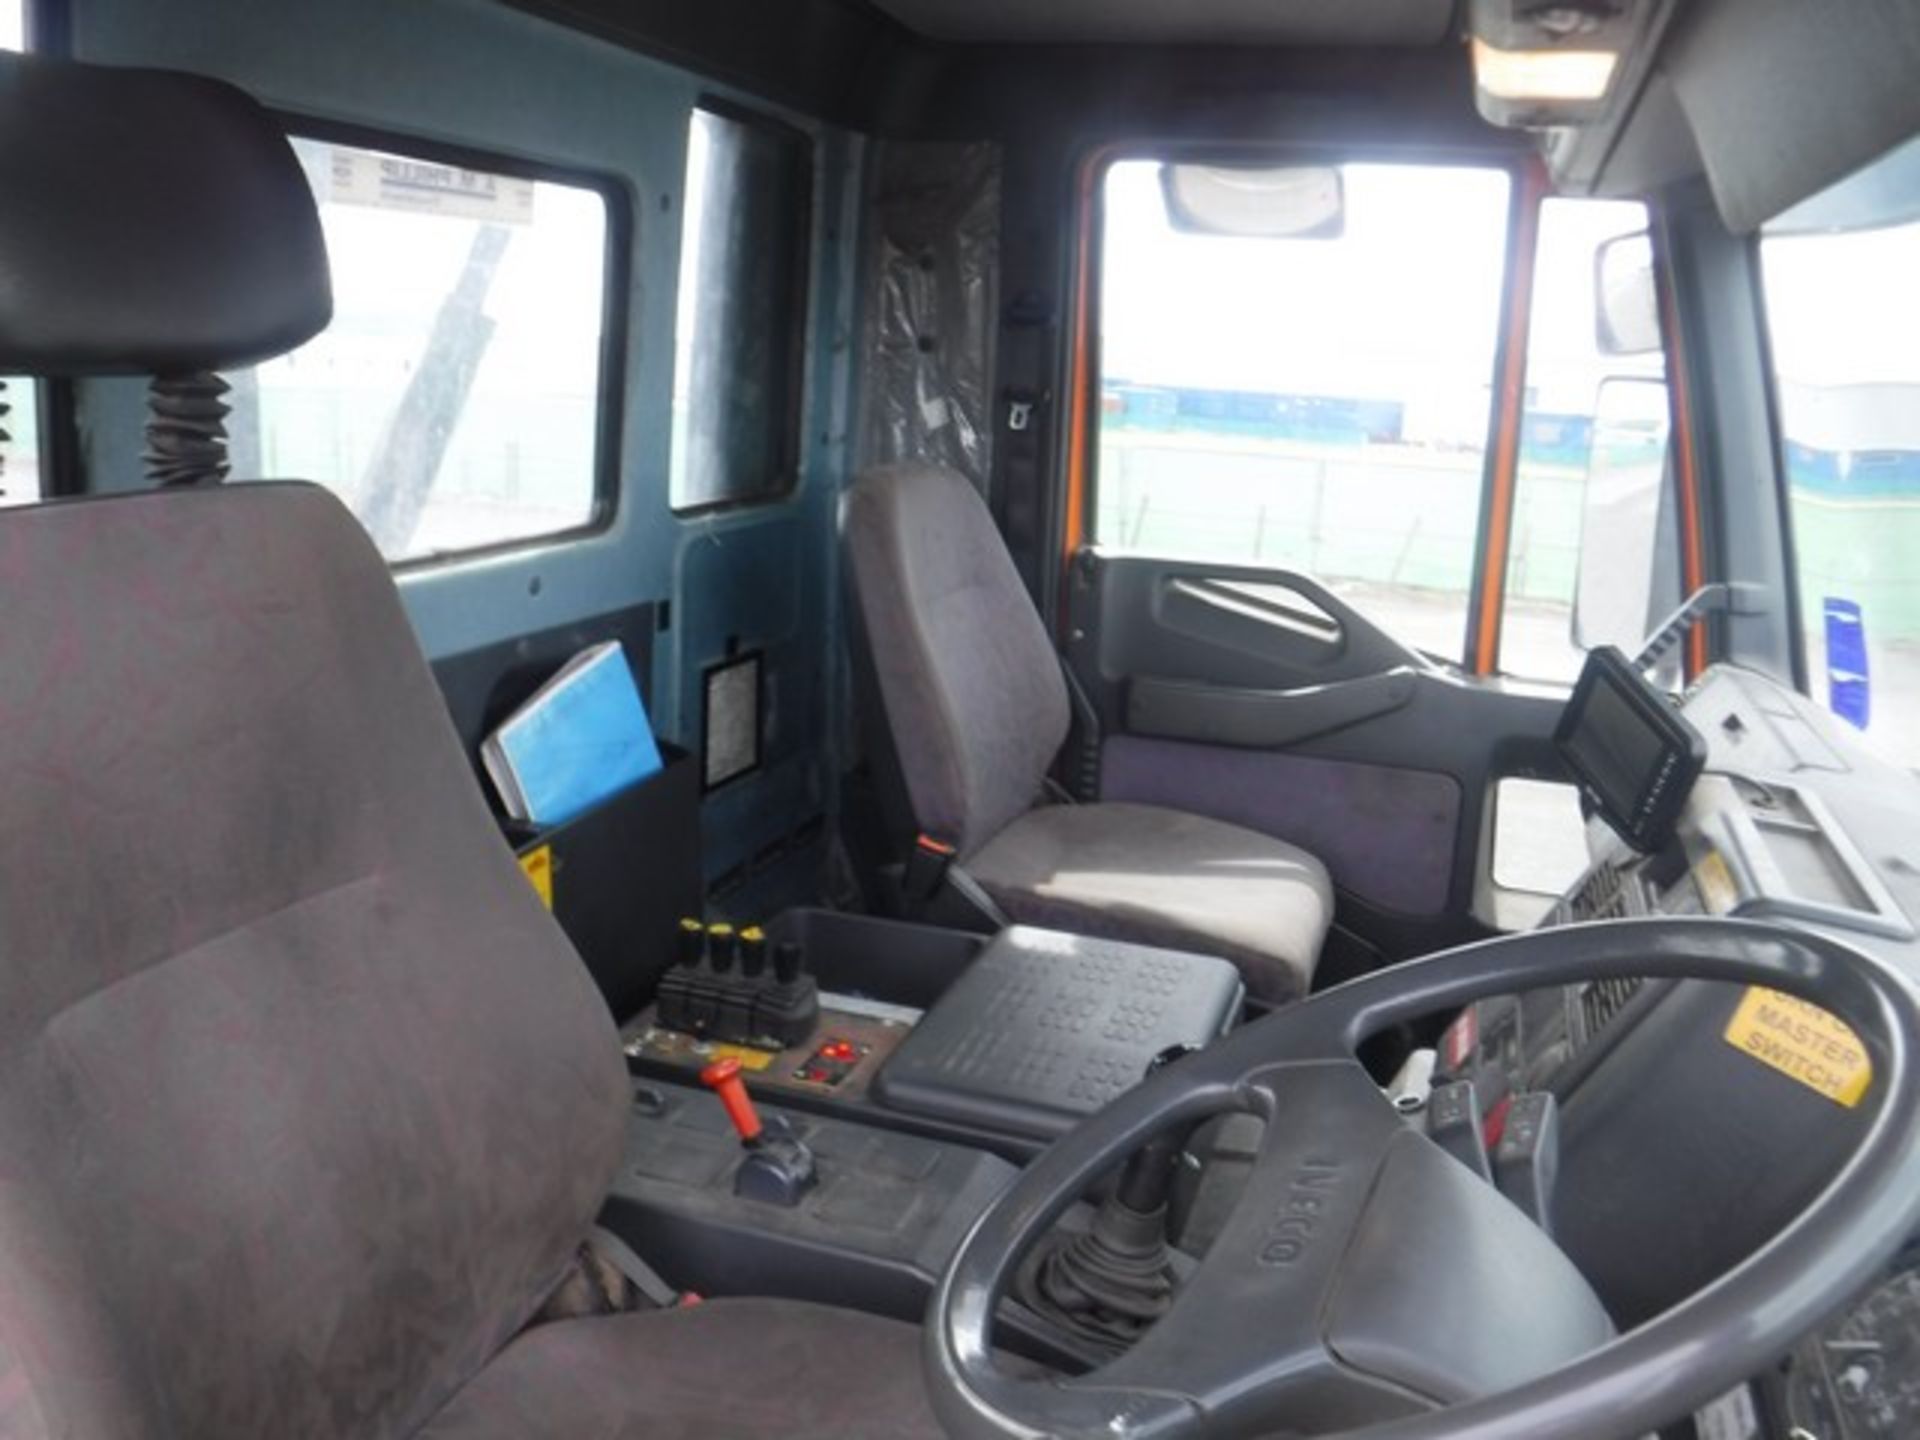 IVECO DAILY 50C15 3.5WB - 7790cc - Image 14 of 41